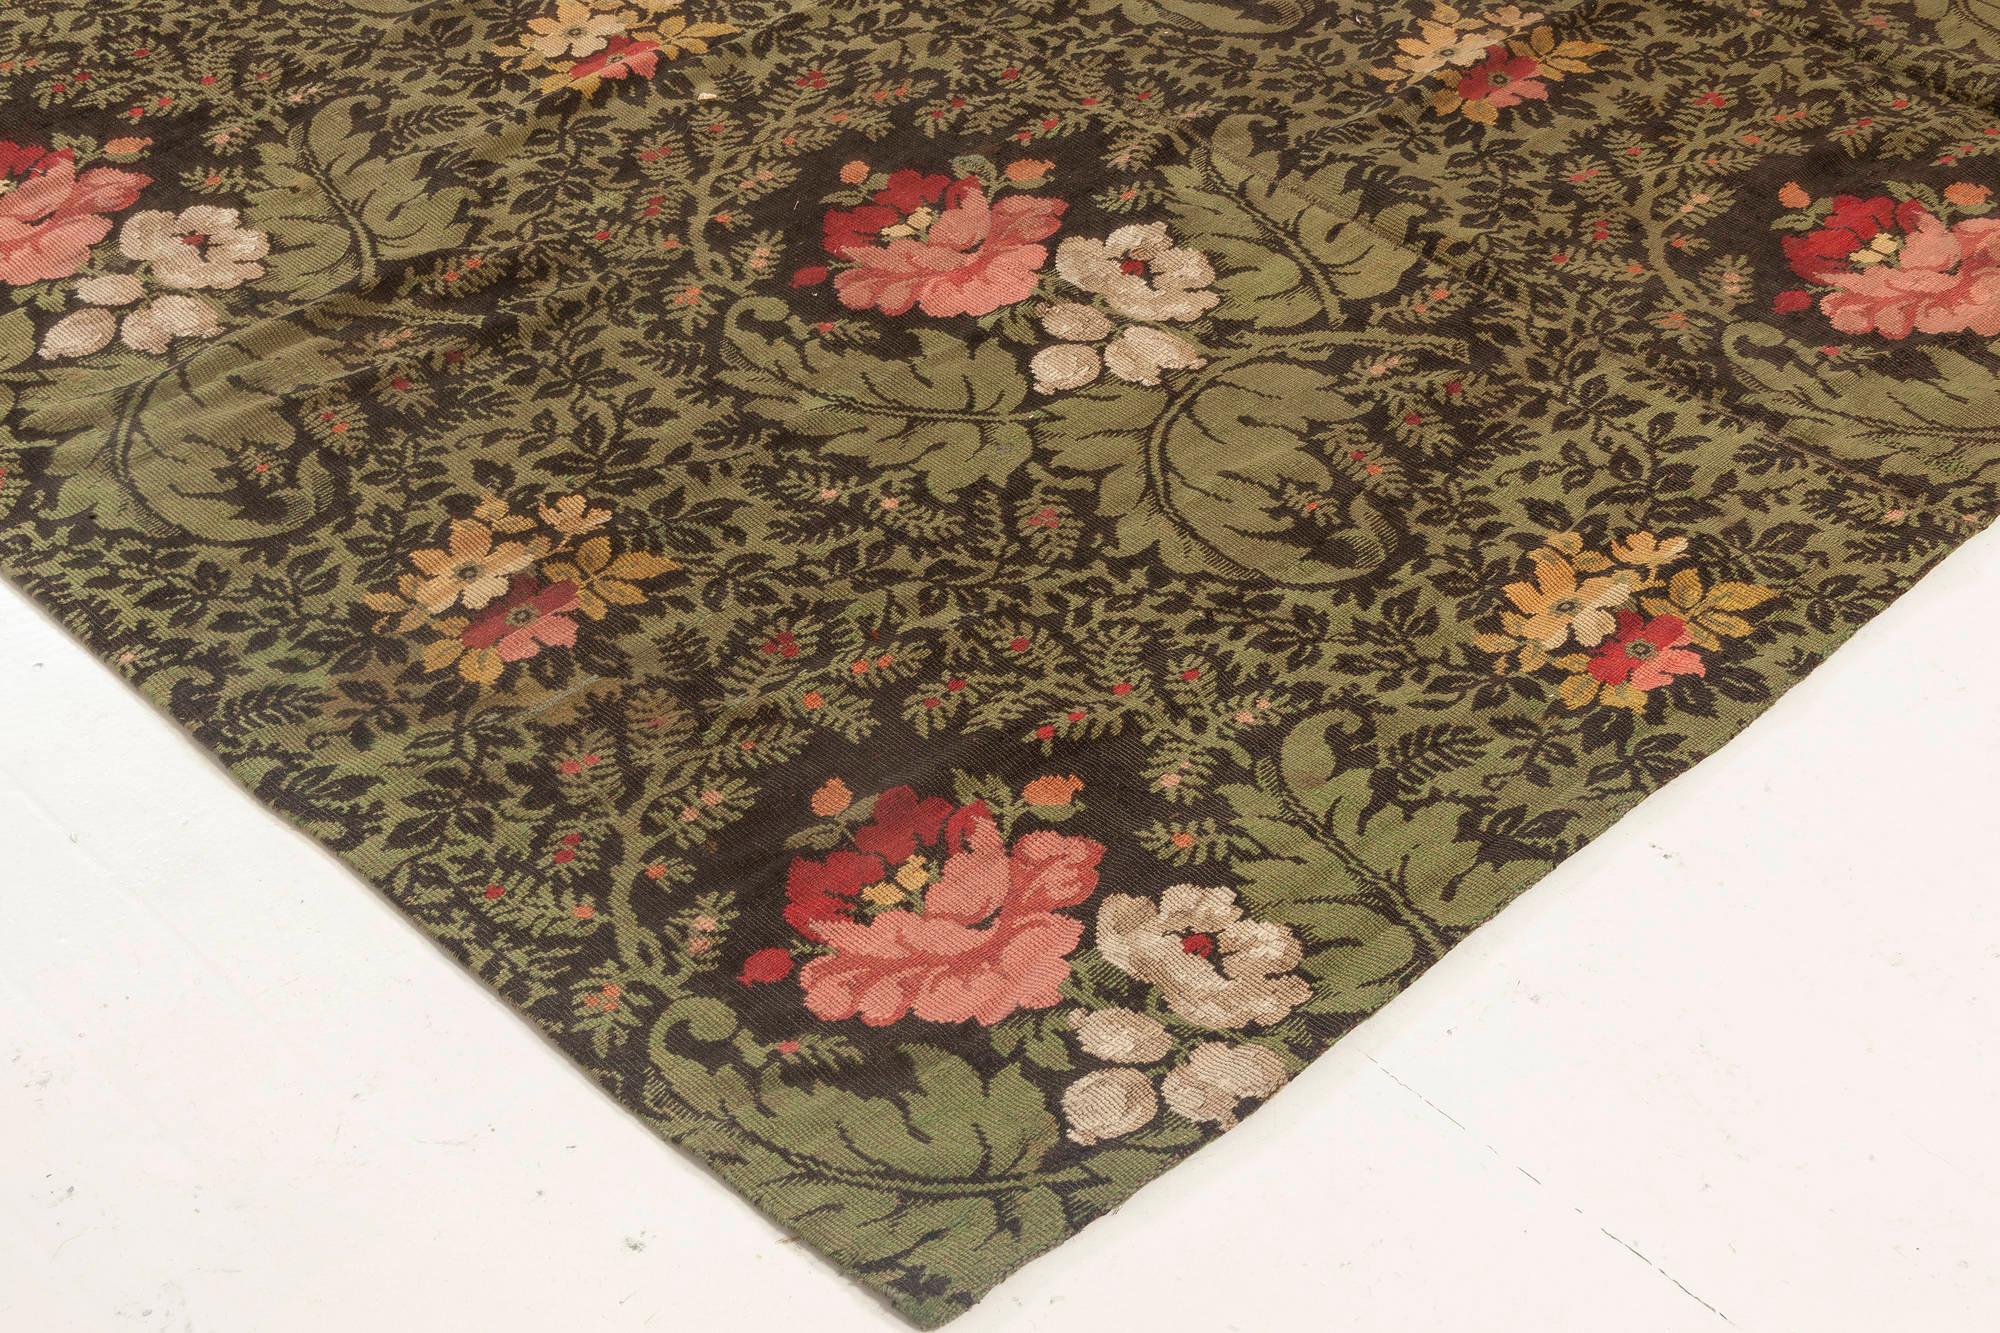 19th Century French Floral Design Green, Black, Pink Needlework Rug For Sale 2